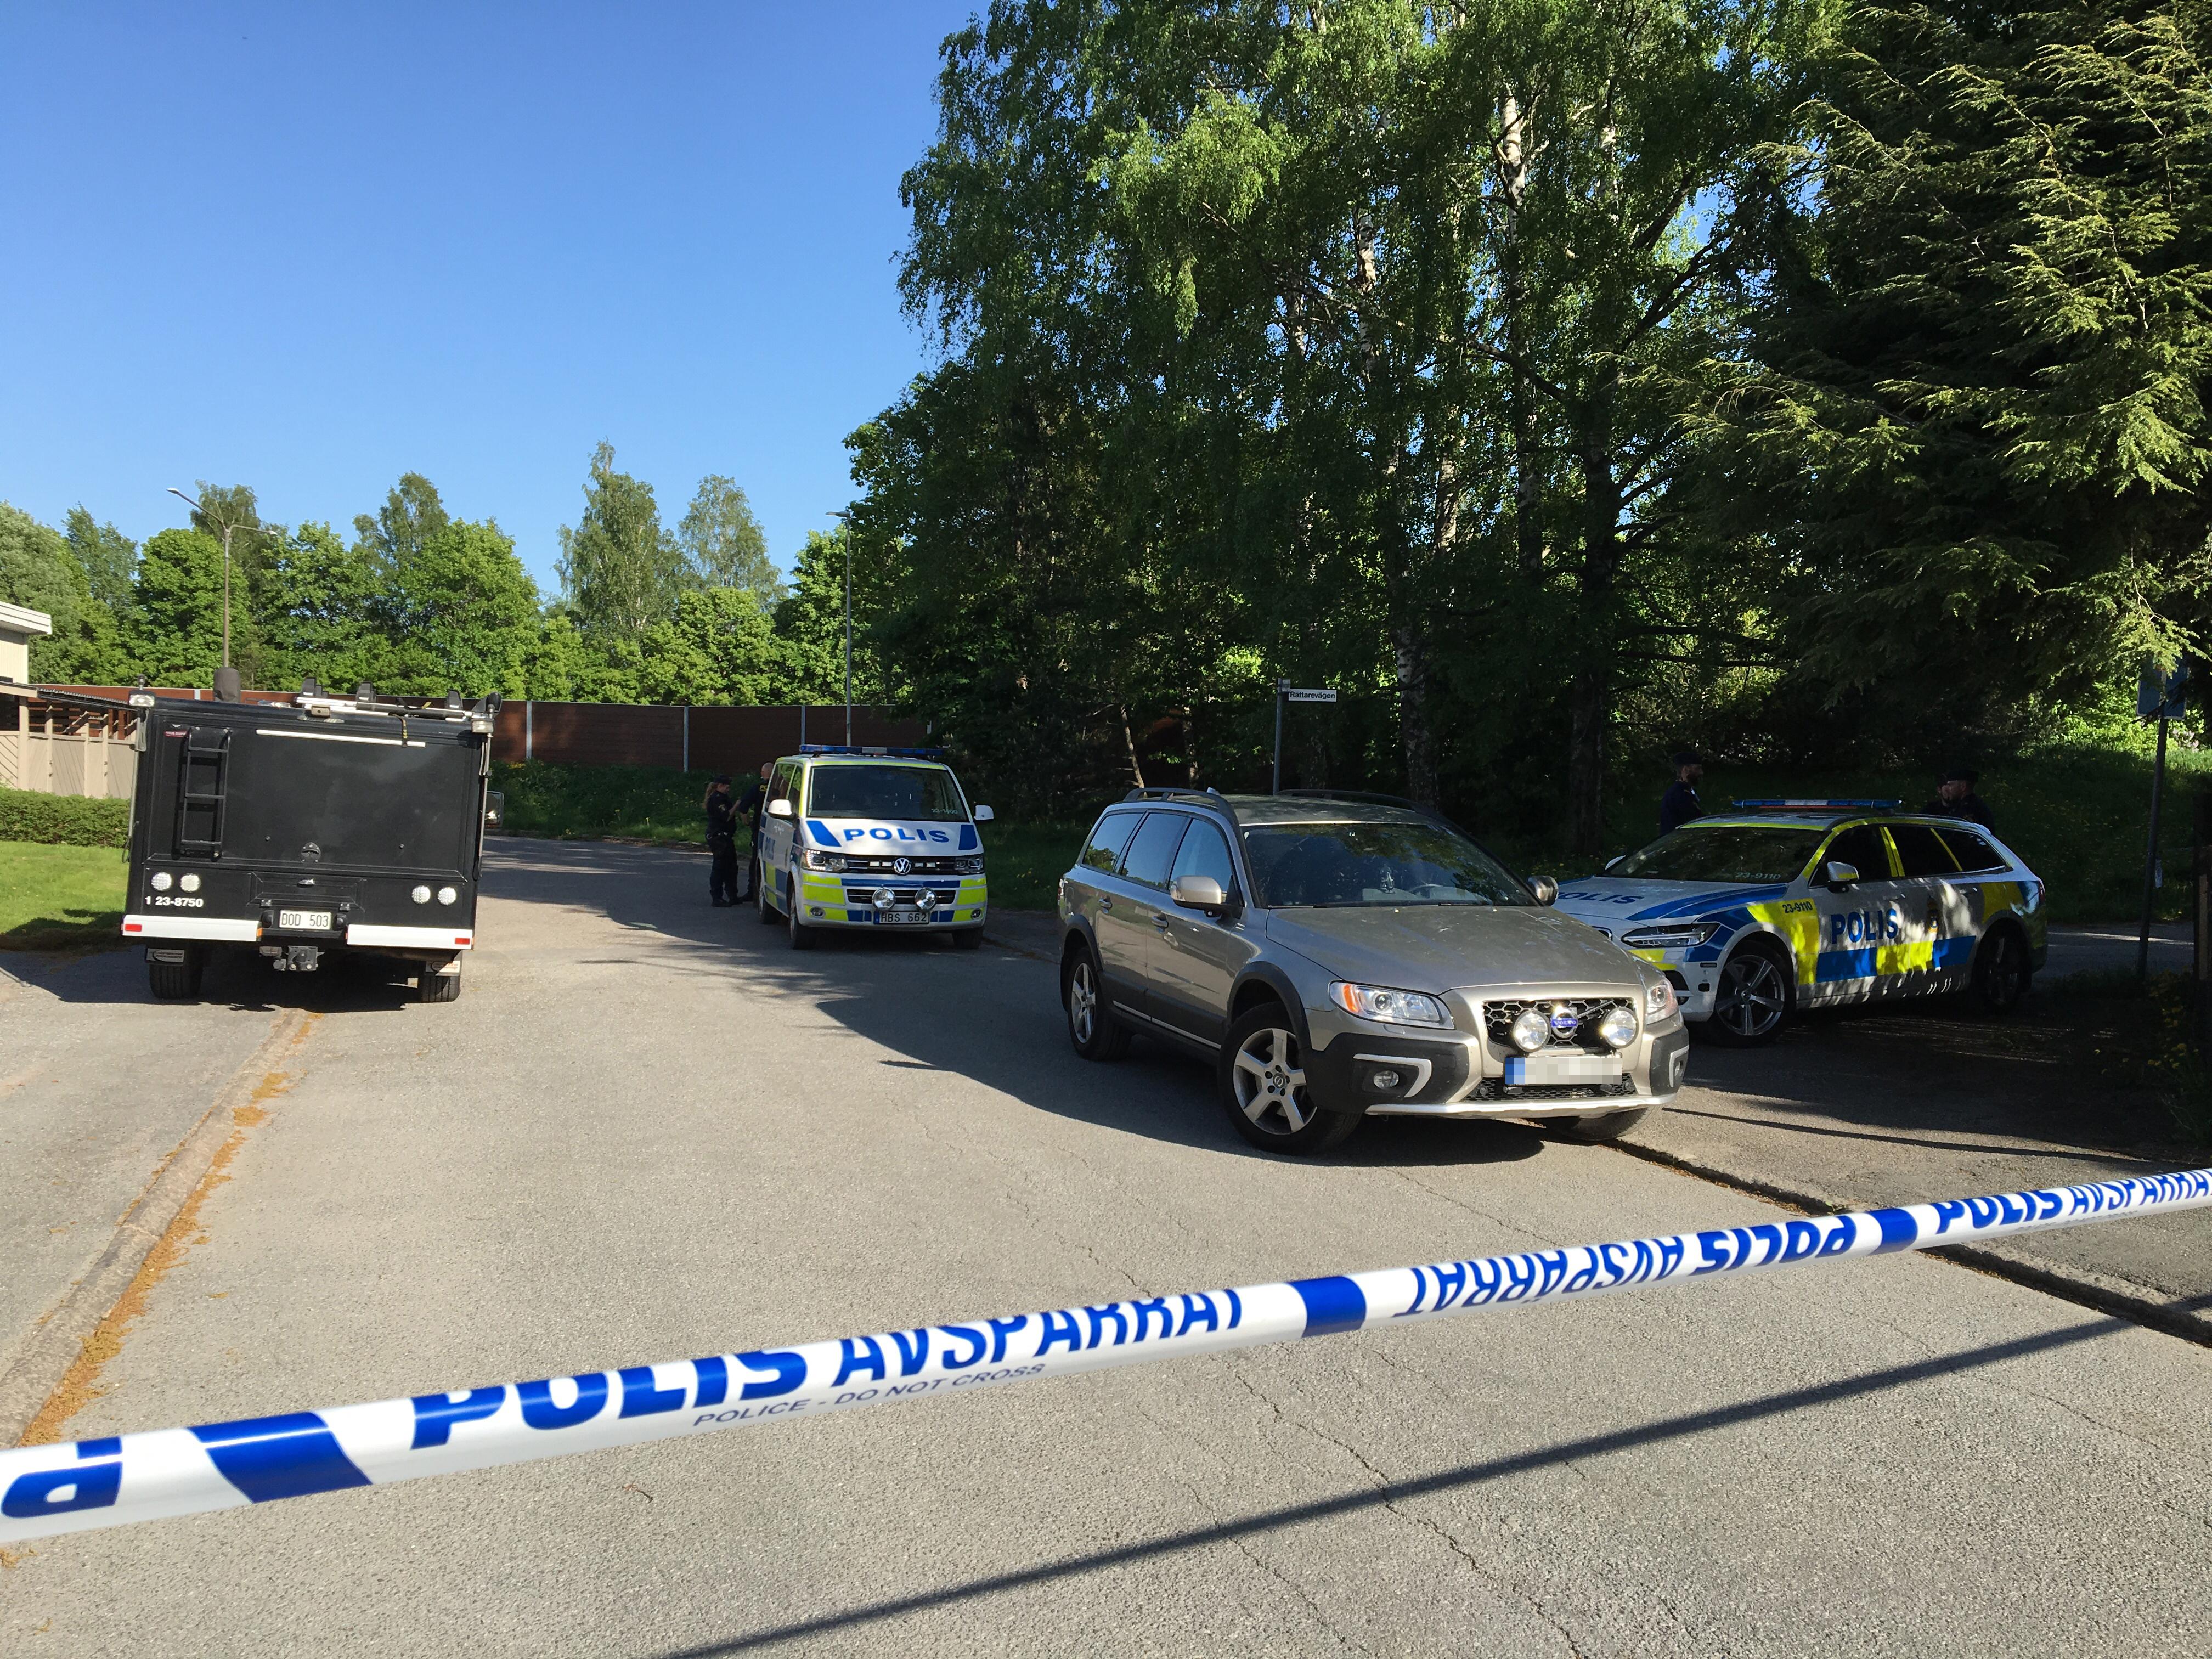 Locks in the area of ​​the villa in Örebro after the death of the woman.